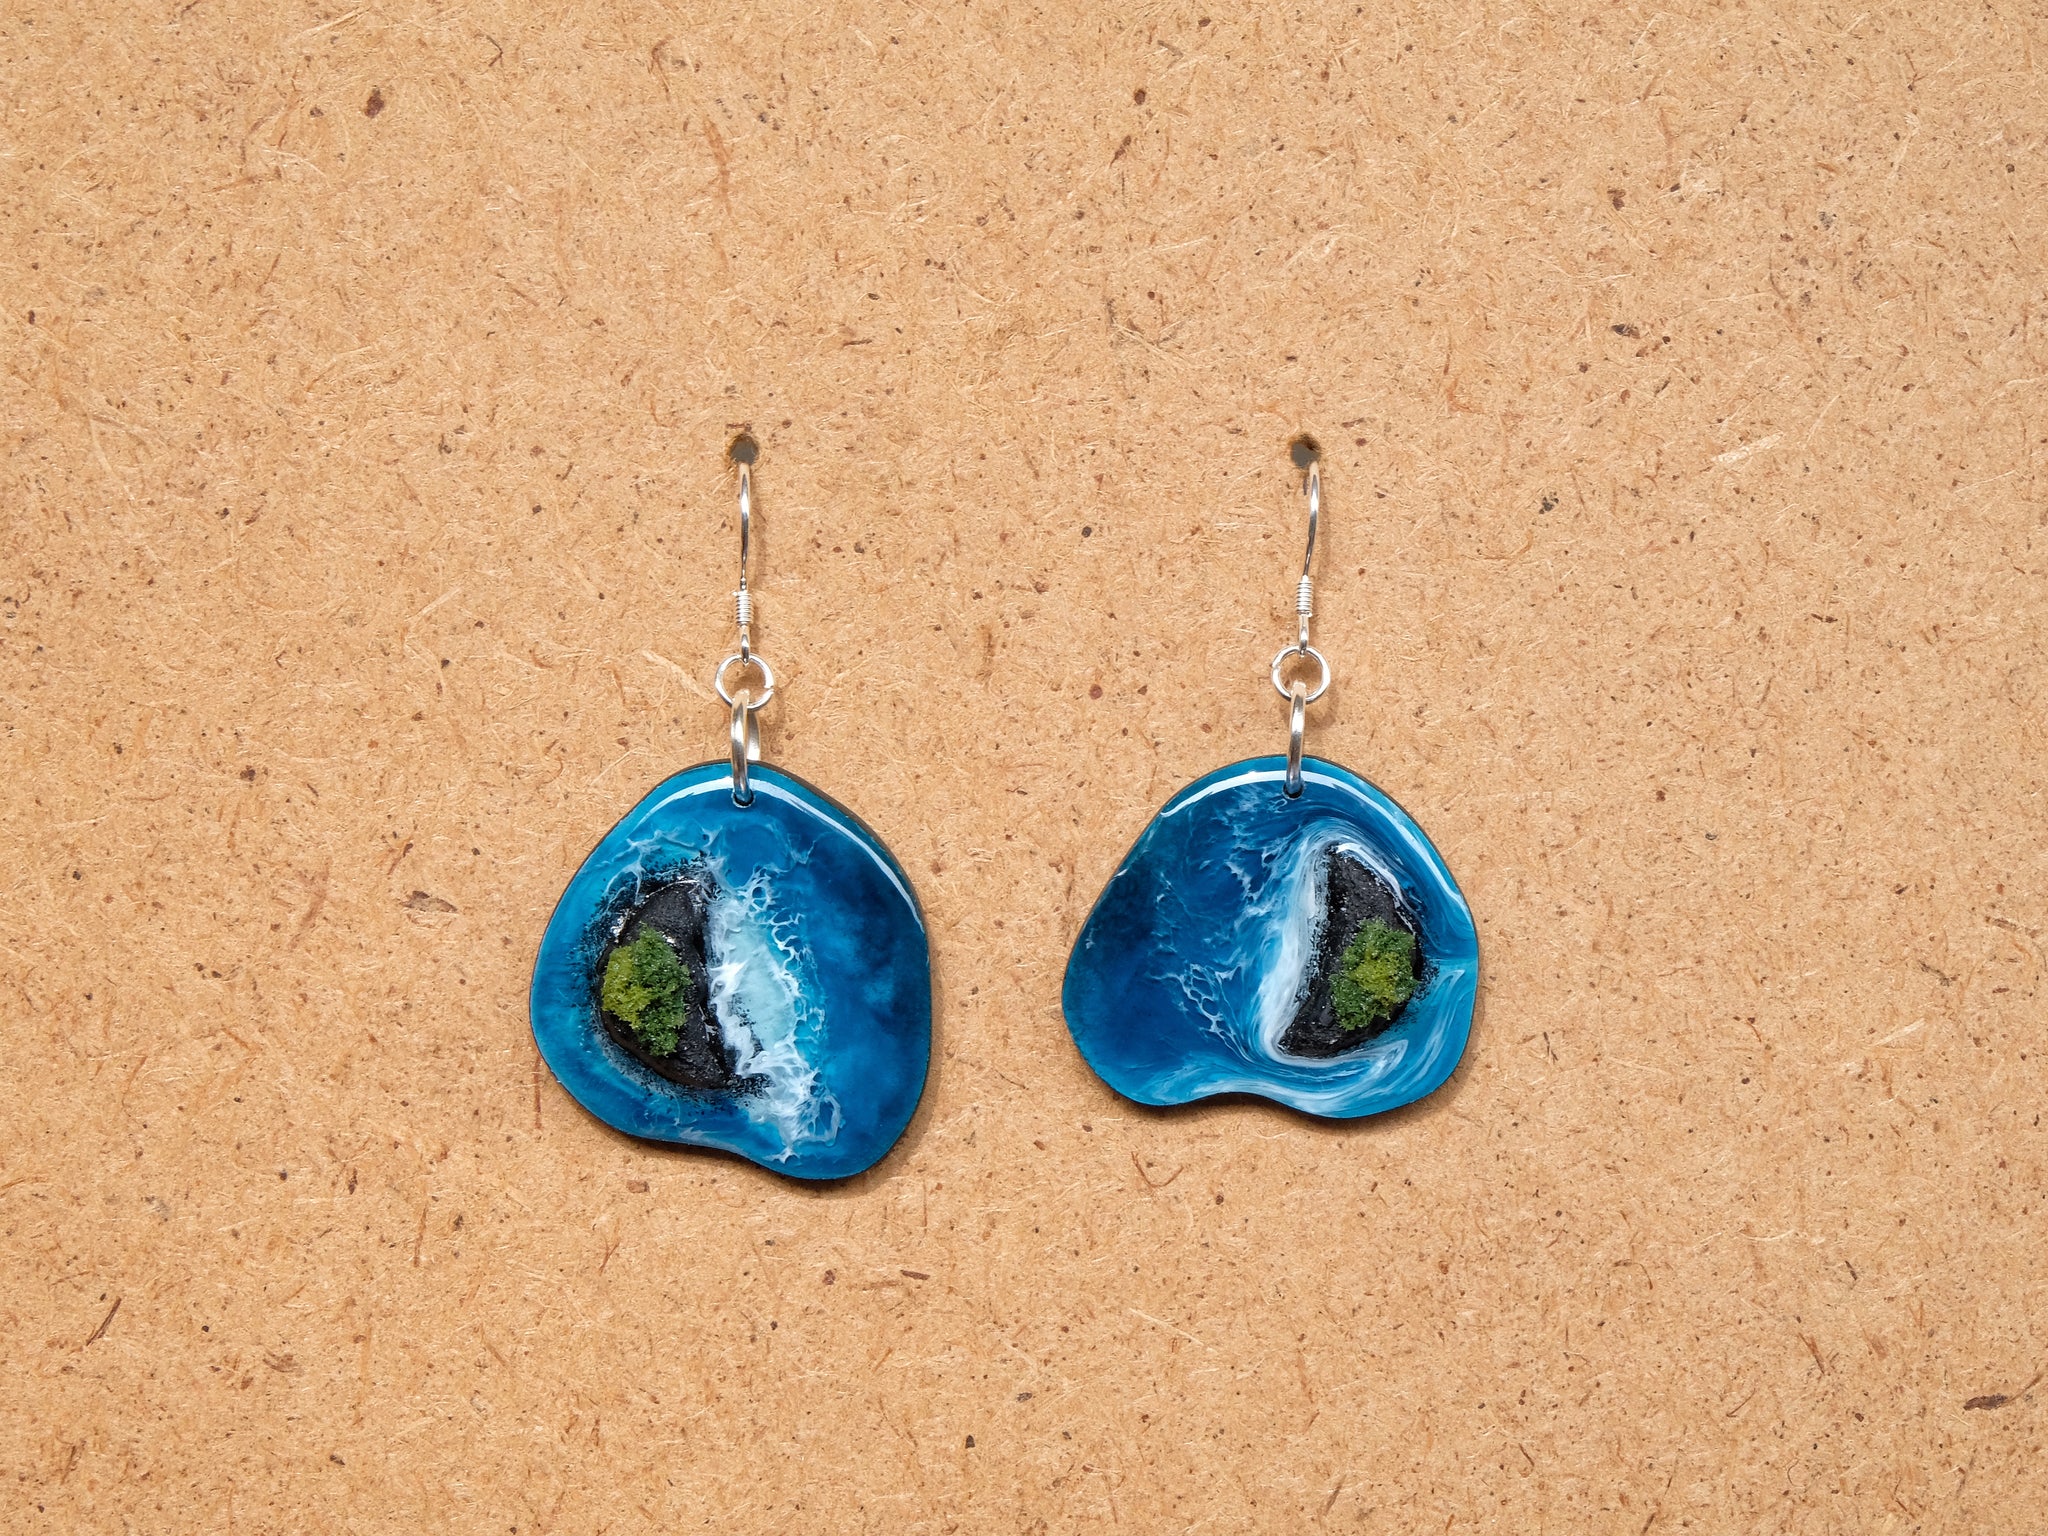 Island Earrings Collection: Teal on Black #2